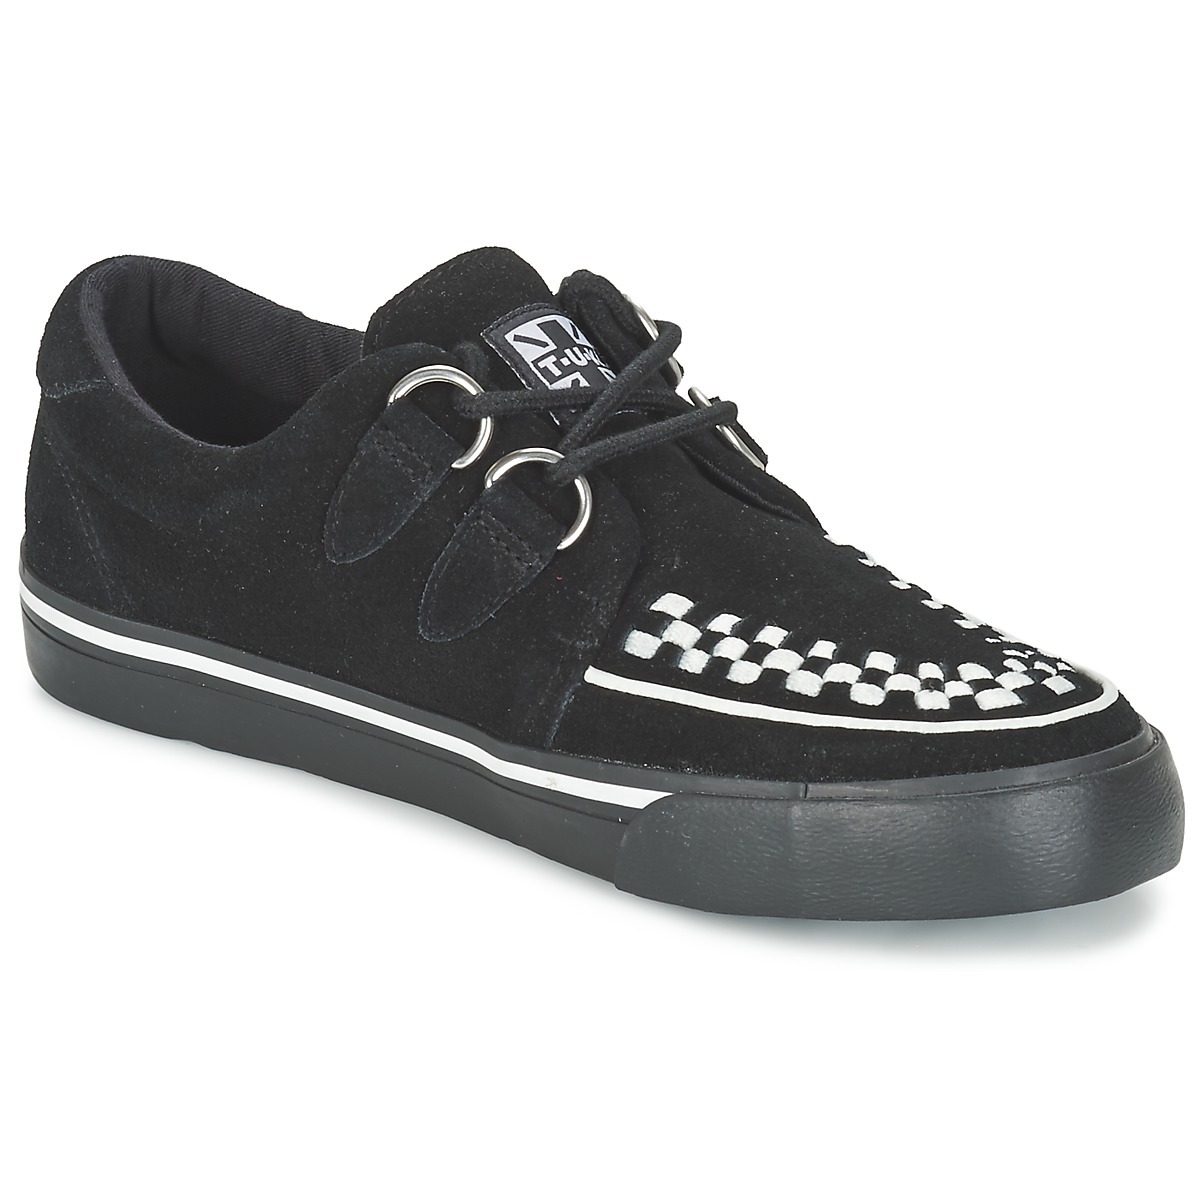 Tuk - Black Sneakers for Women by Spartoo GOOFASH